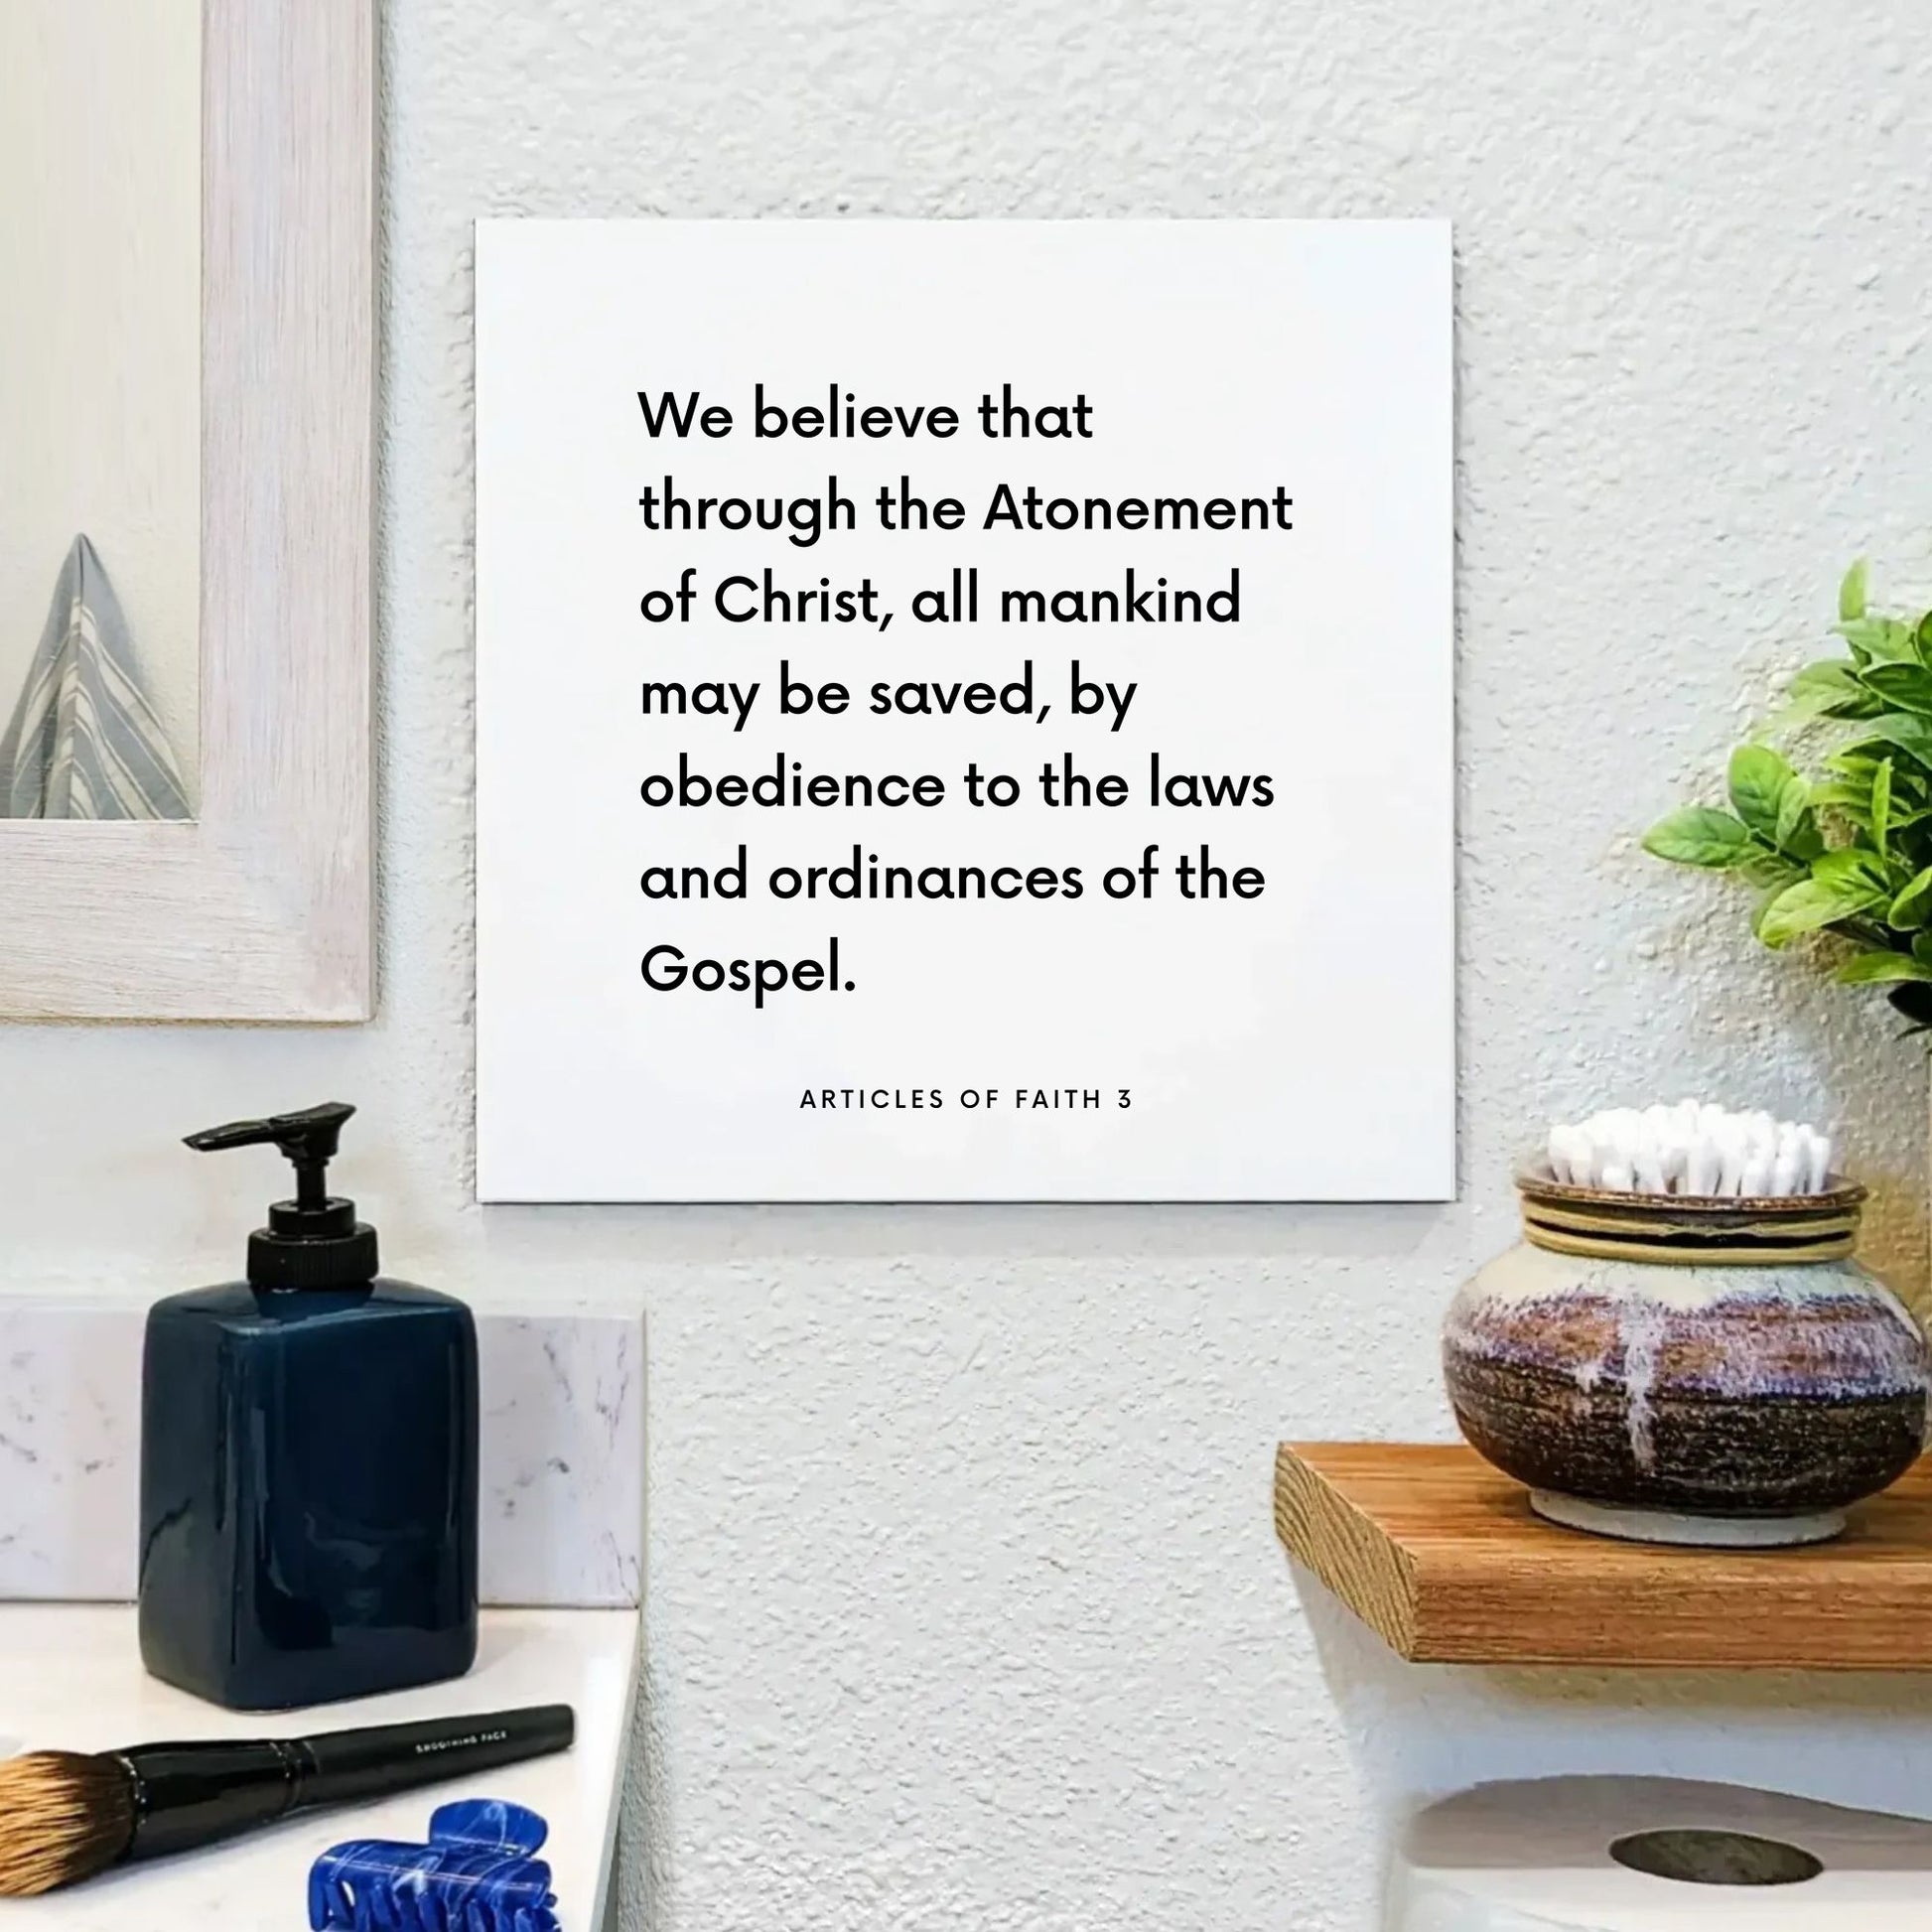 Bathroom mouting of the scripture tile for Articles of Faith 3 - "We believe that through the Atonement of Christ"